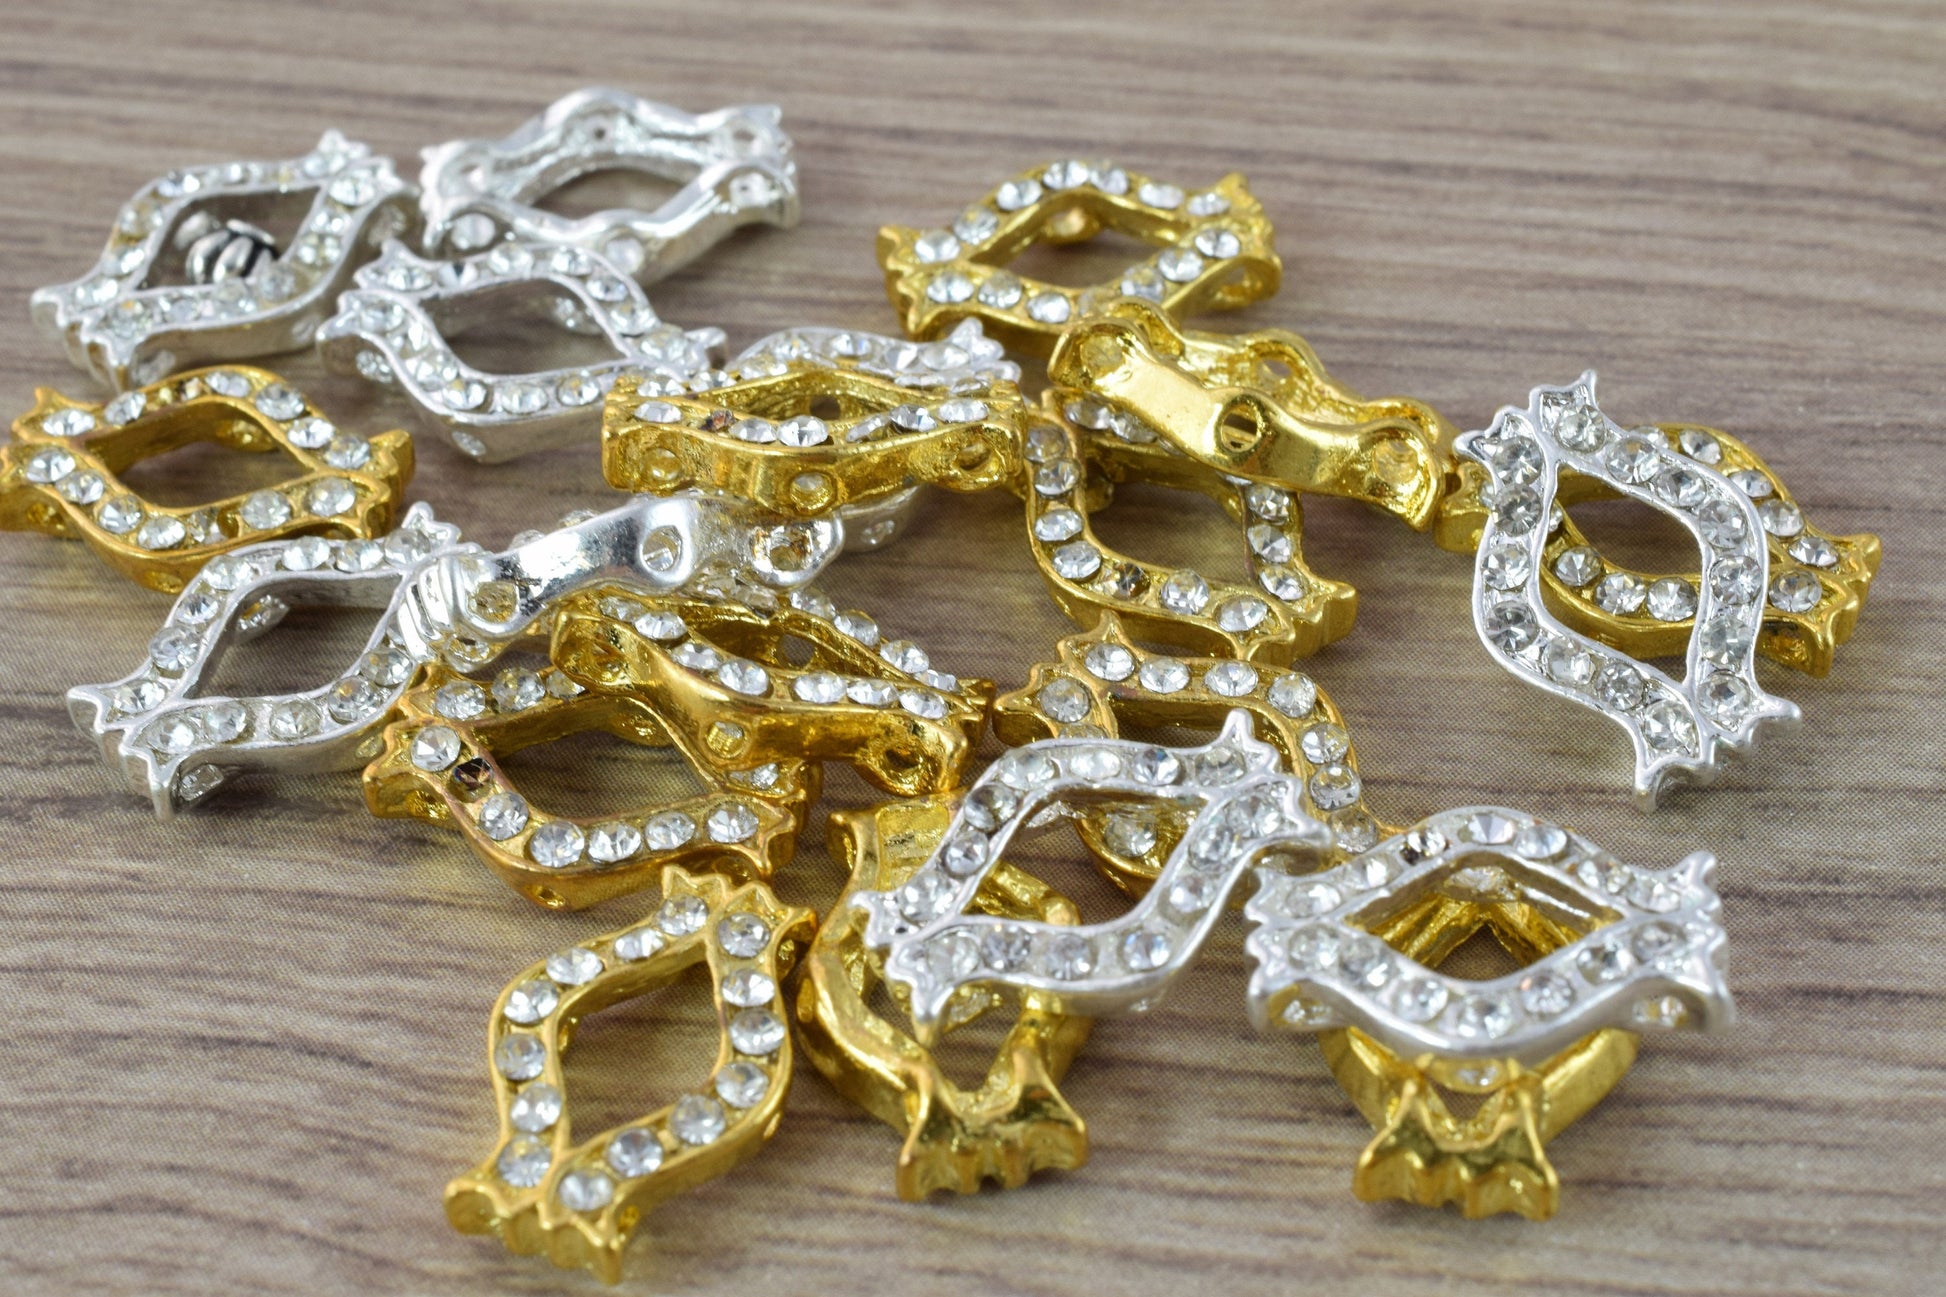 6 hole Rhinestone Connector Silver/Gold Plated/ 6 Hole Connector/Wholesale Connectors/Jewelry Making/charm connectors/gemstone connectors/